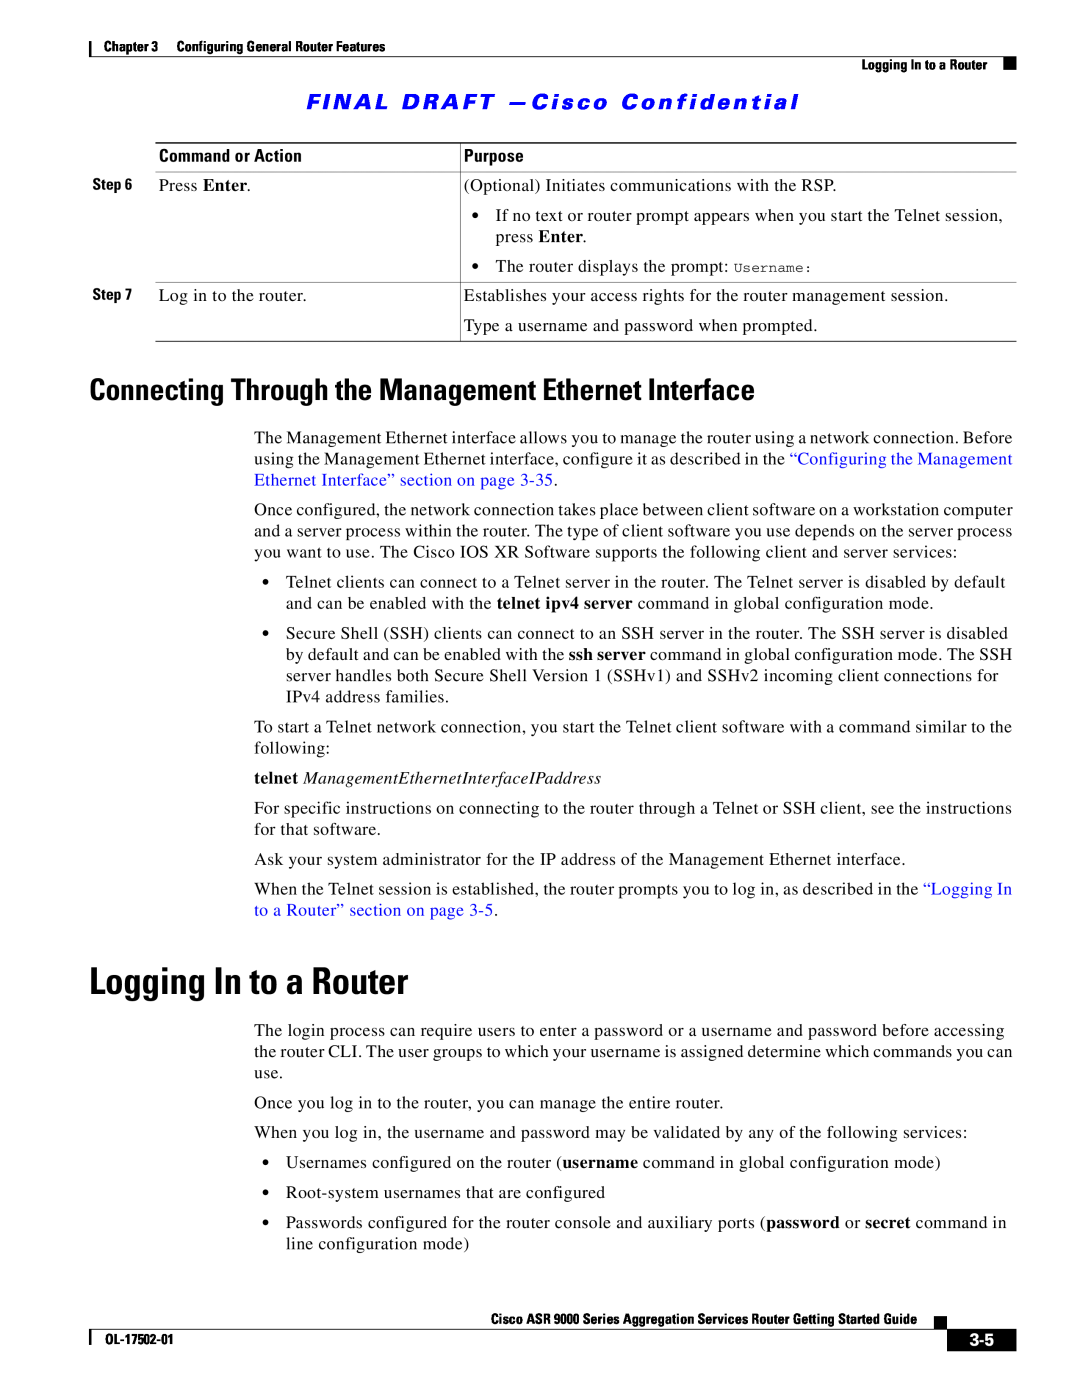 Cisco Systems A9KMOD80TR, ASR 9000 manual Logging In to a Router, Connecting Through the Management Ethernet Interface 